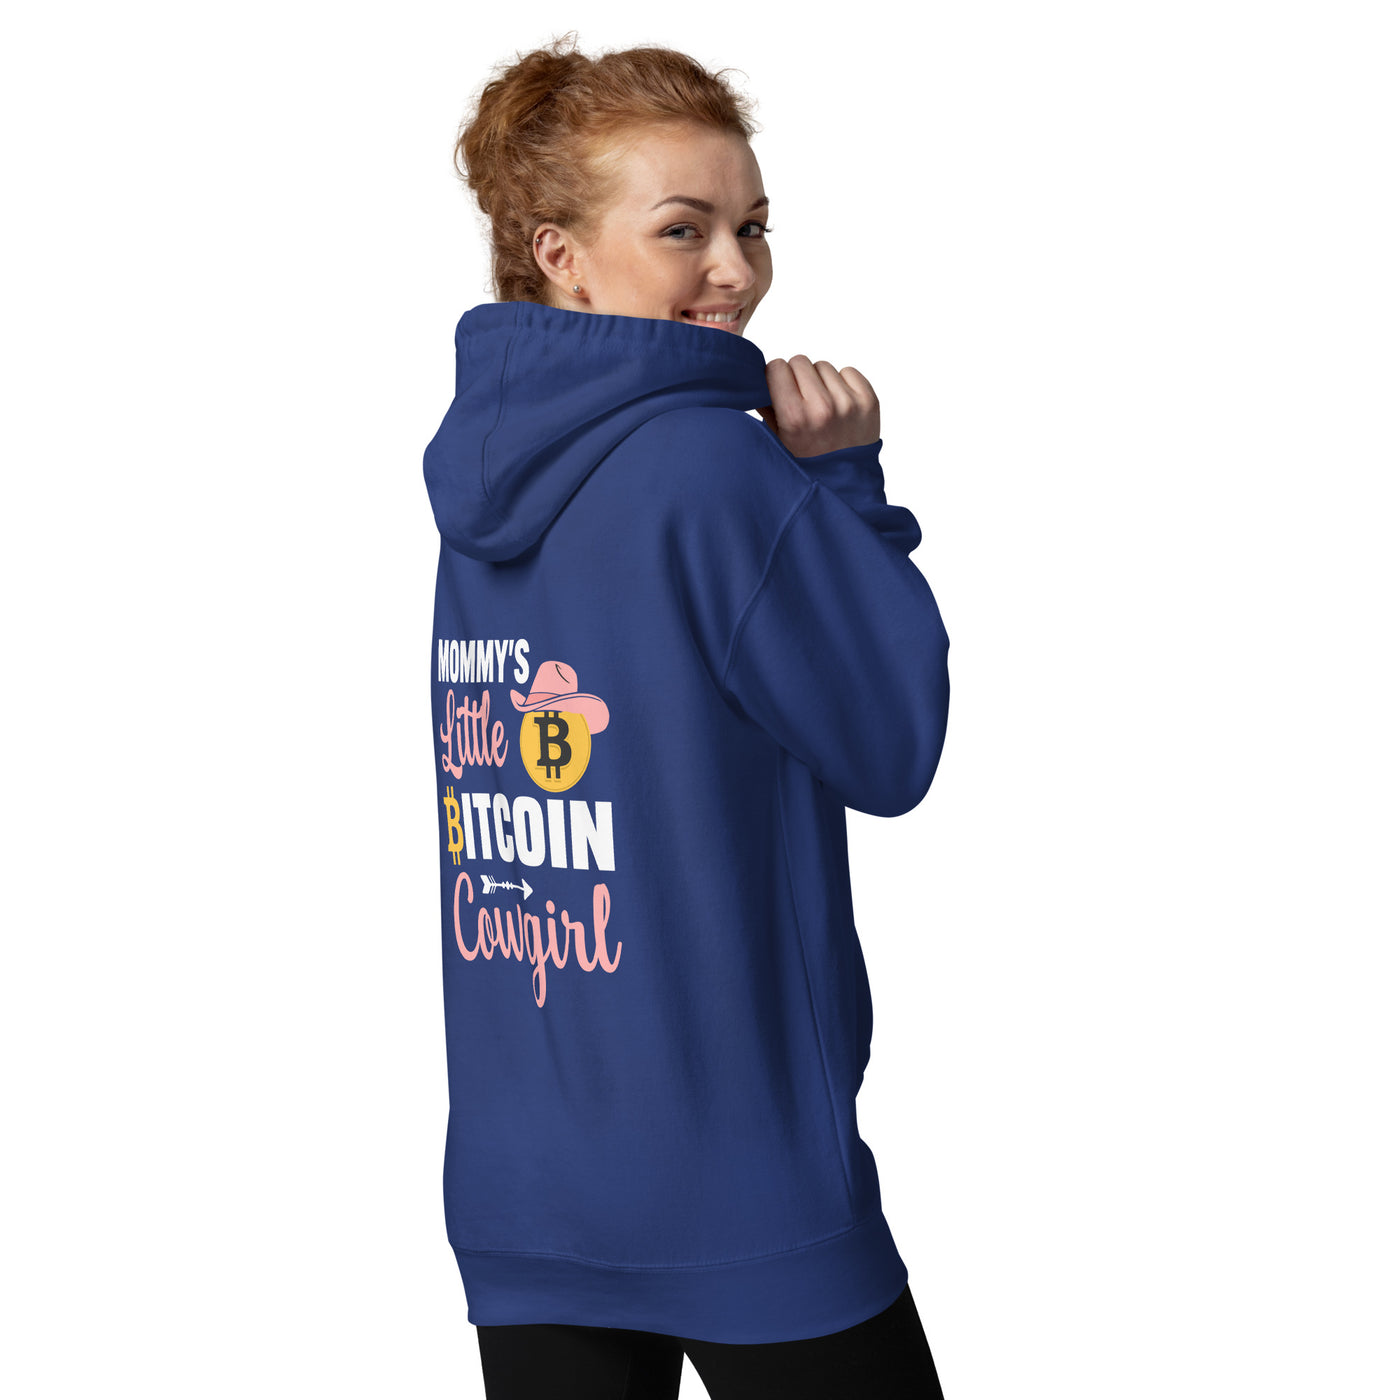 Mommy's little bitcoin cowgirl Unisex Hoodie ( Back Print )